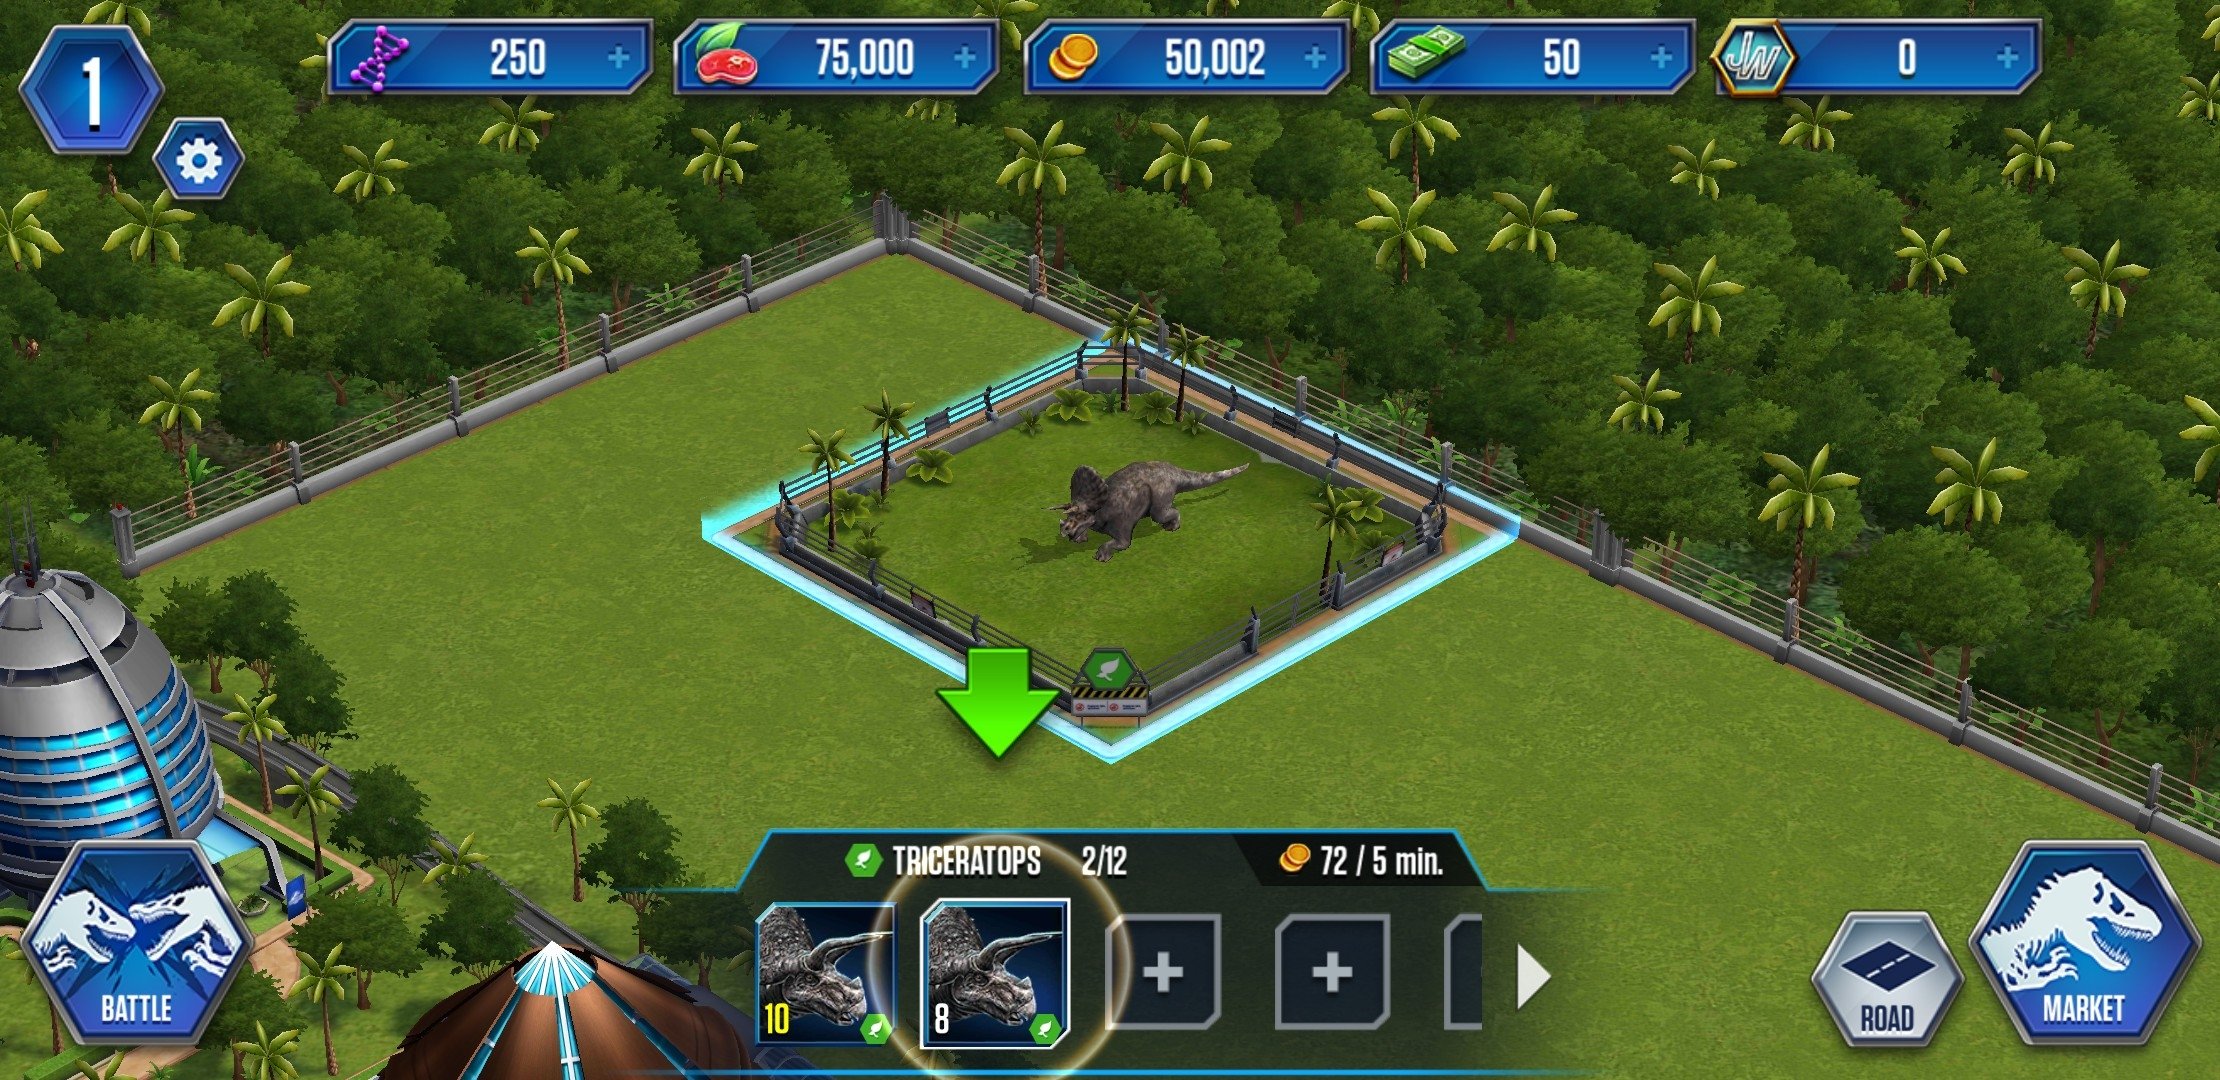 jurassic world evolution download for android